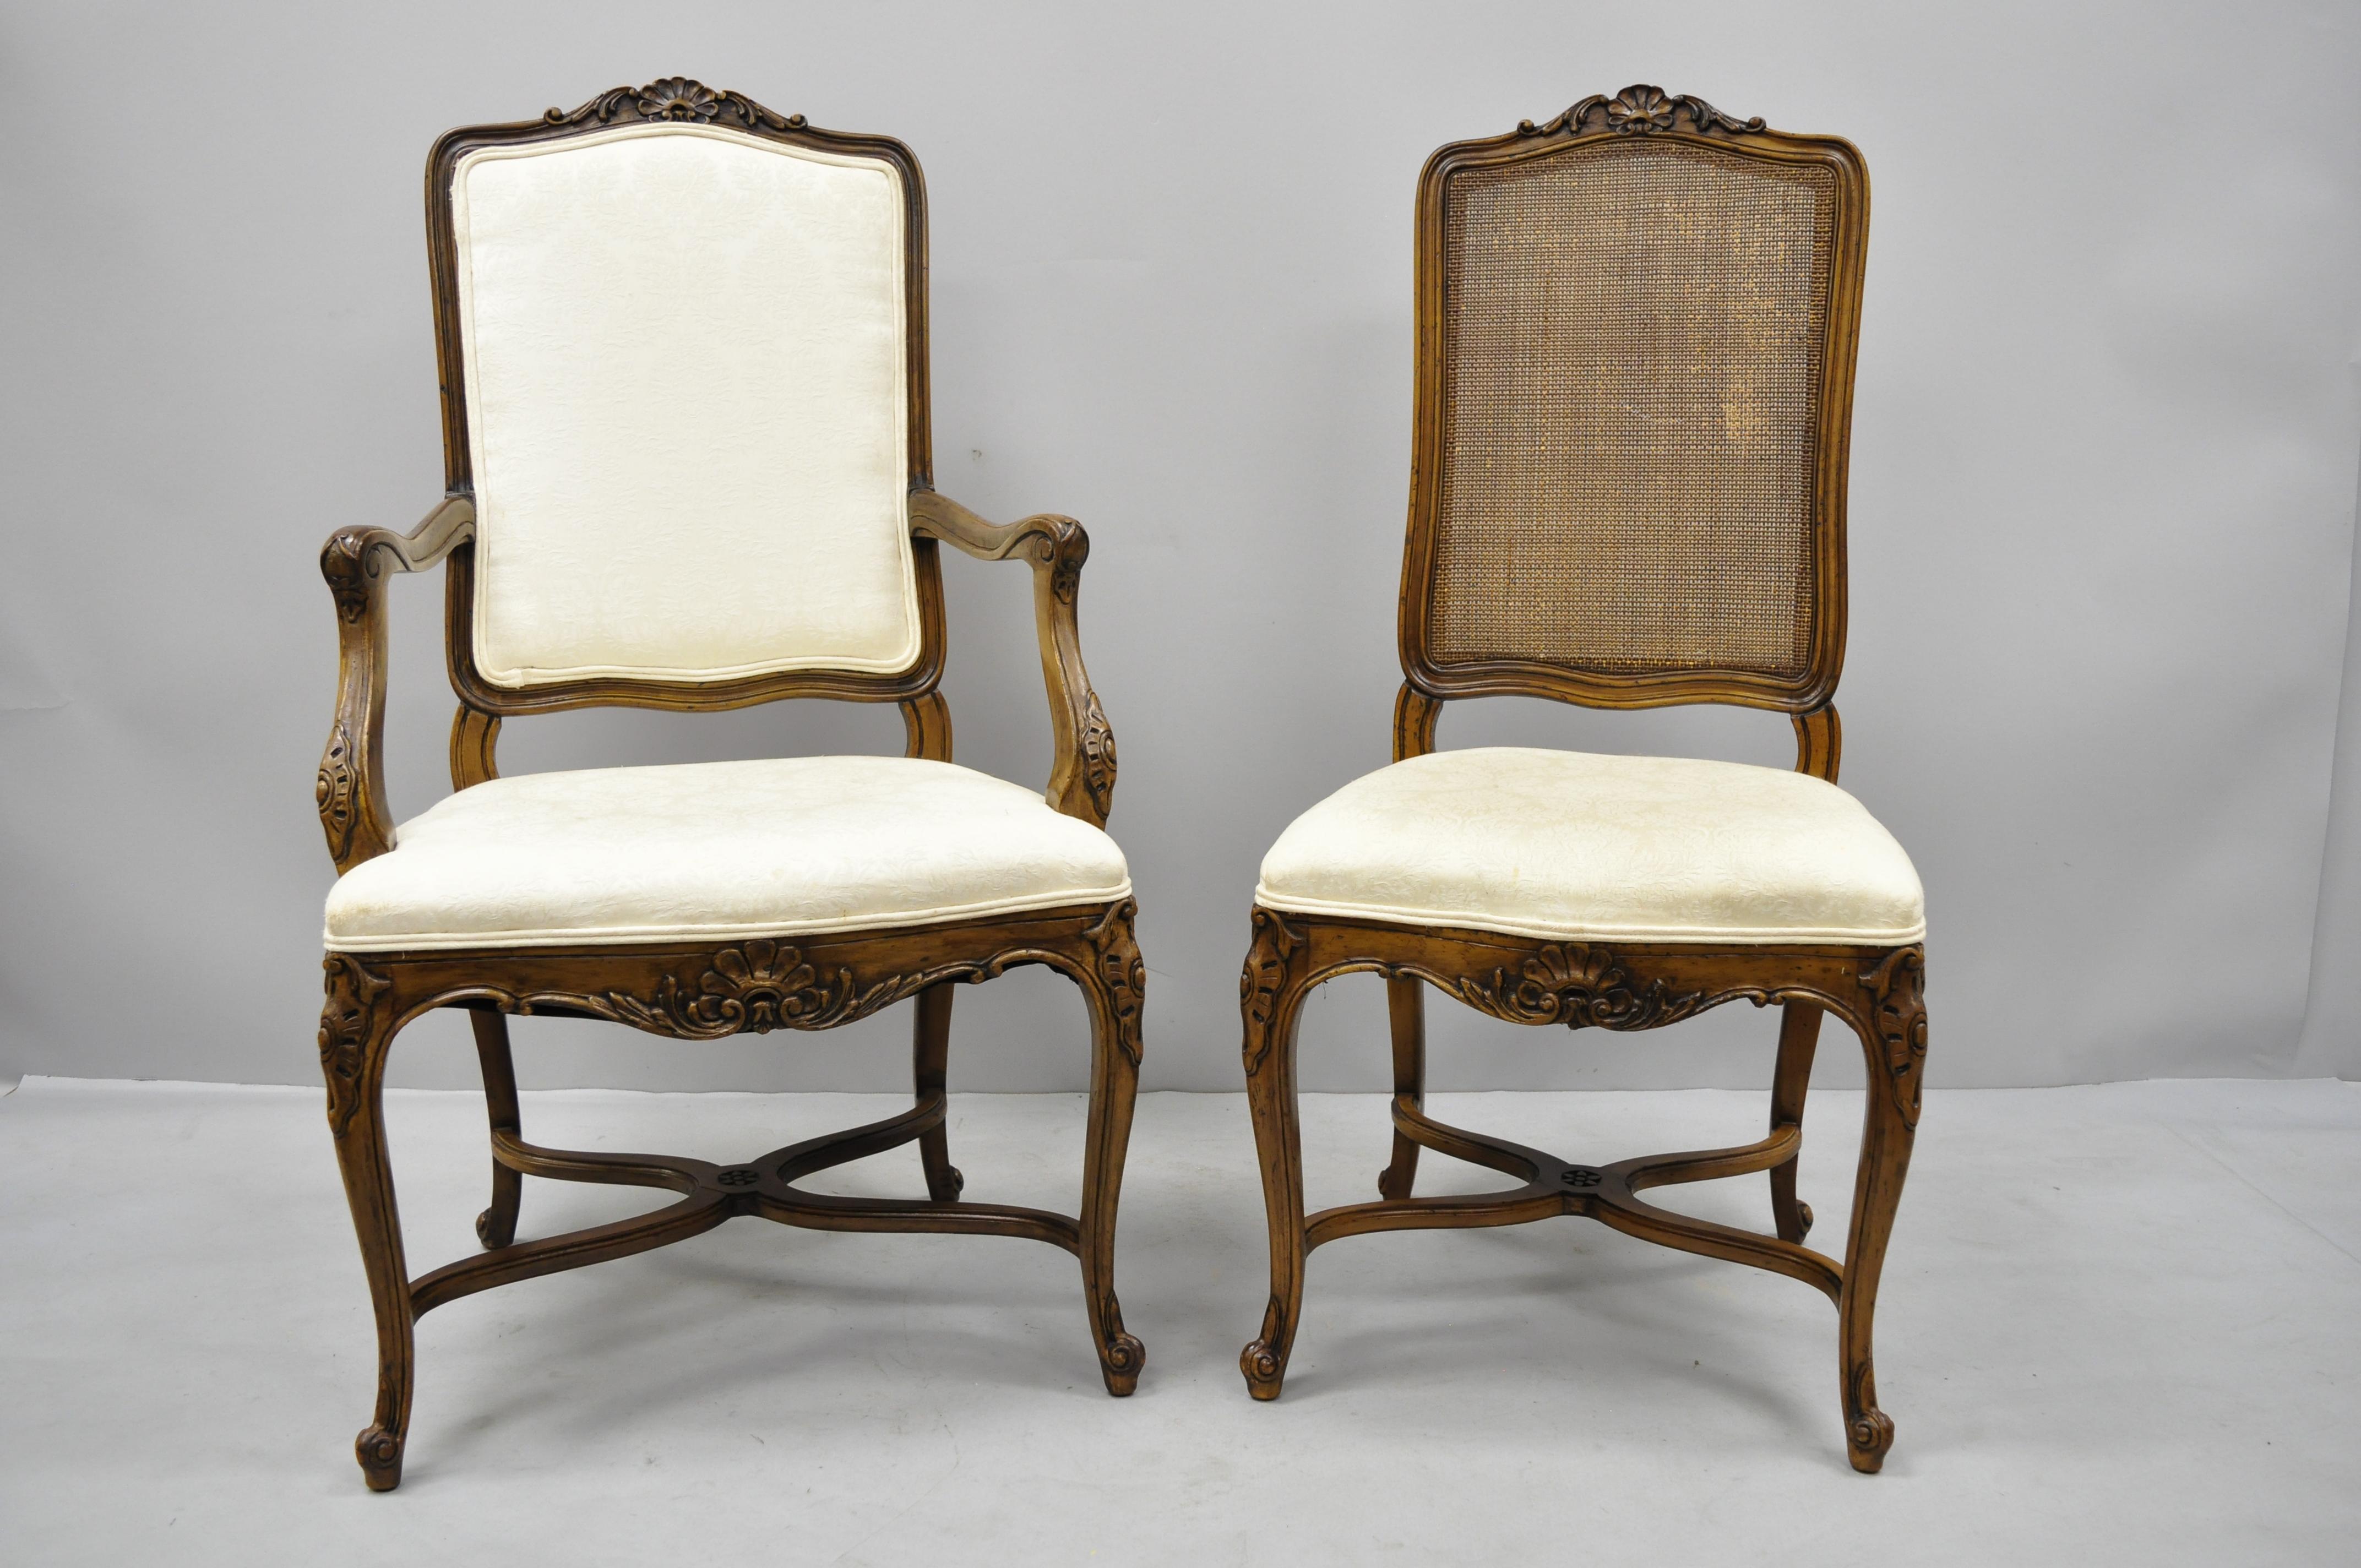 8 John Widdicomb carved walnut cane back French Country Louis XV style dining chairs. Listing includes 2 armchairs, 6 side chairs, shell carved top rail and lower rail, stretcher supports, cane backs, circa mid-20th century. Measurements: Armchairs